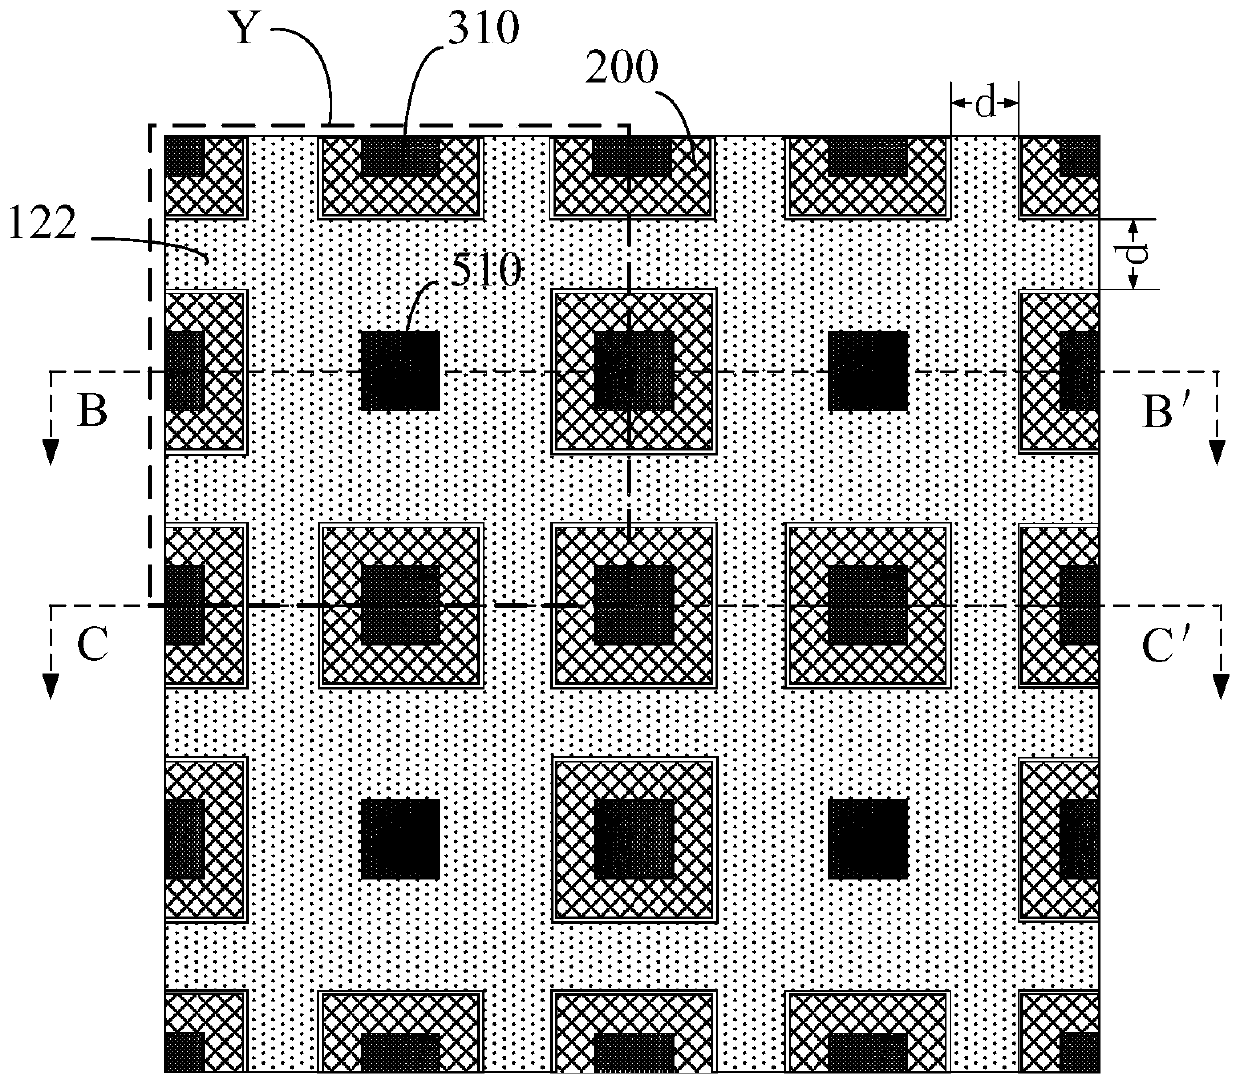 Trench type vertical double-diffusion metal oxide semiconductor field effect transistor